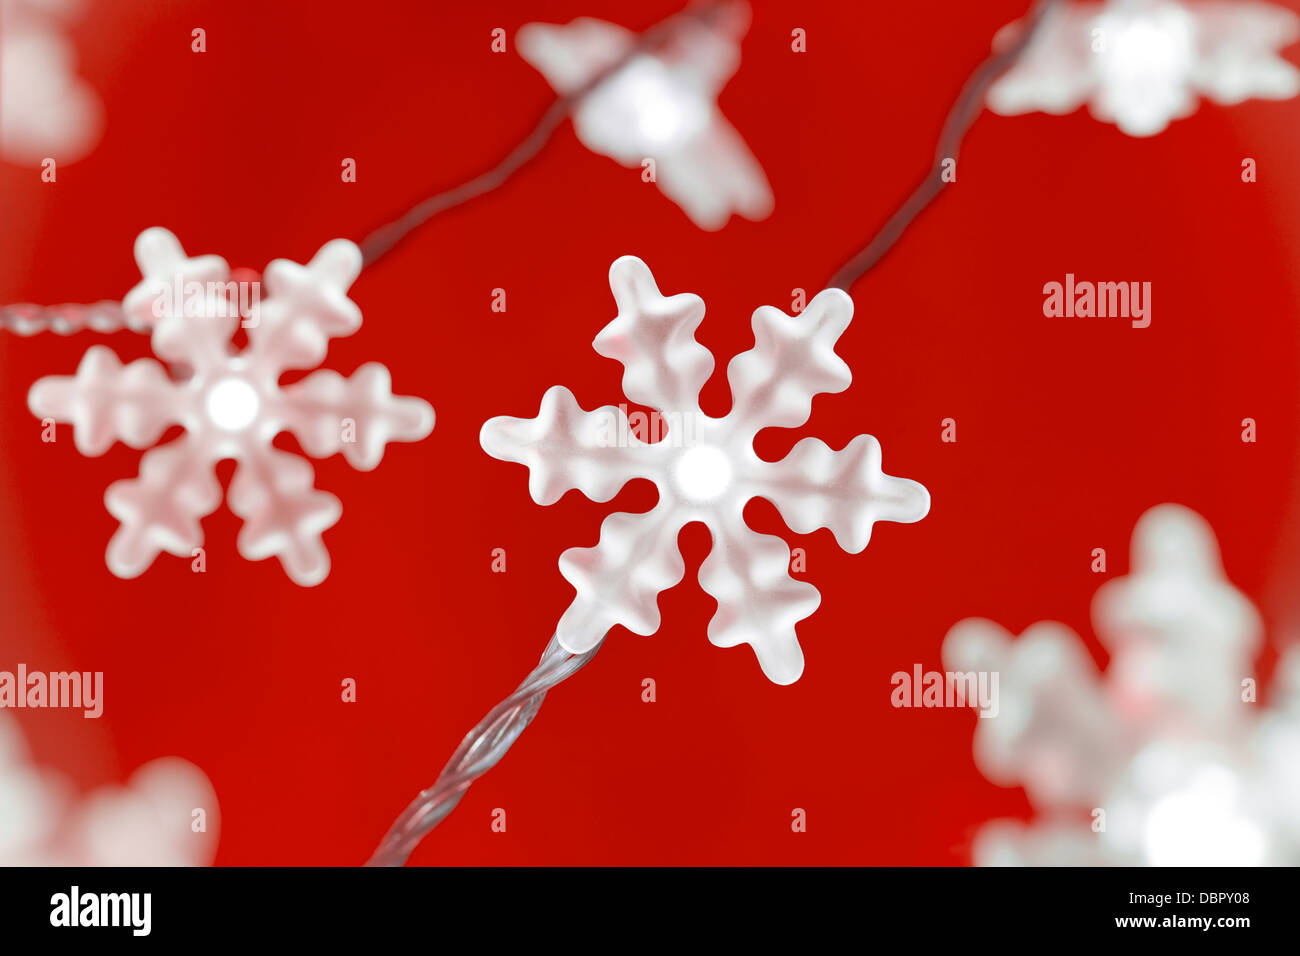 Snowflake shaped fairy lights against a red background. Stock Photo